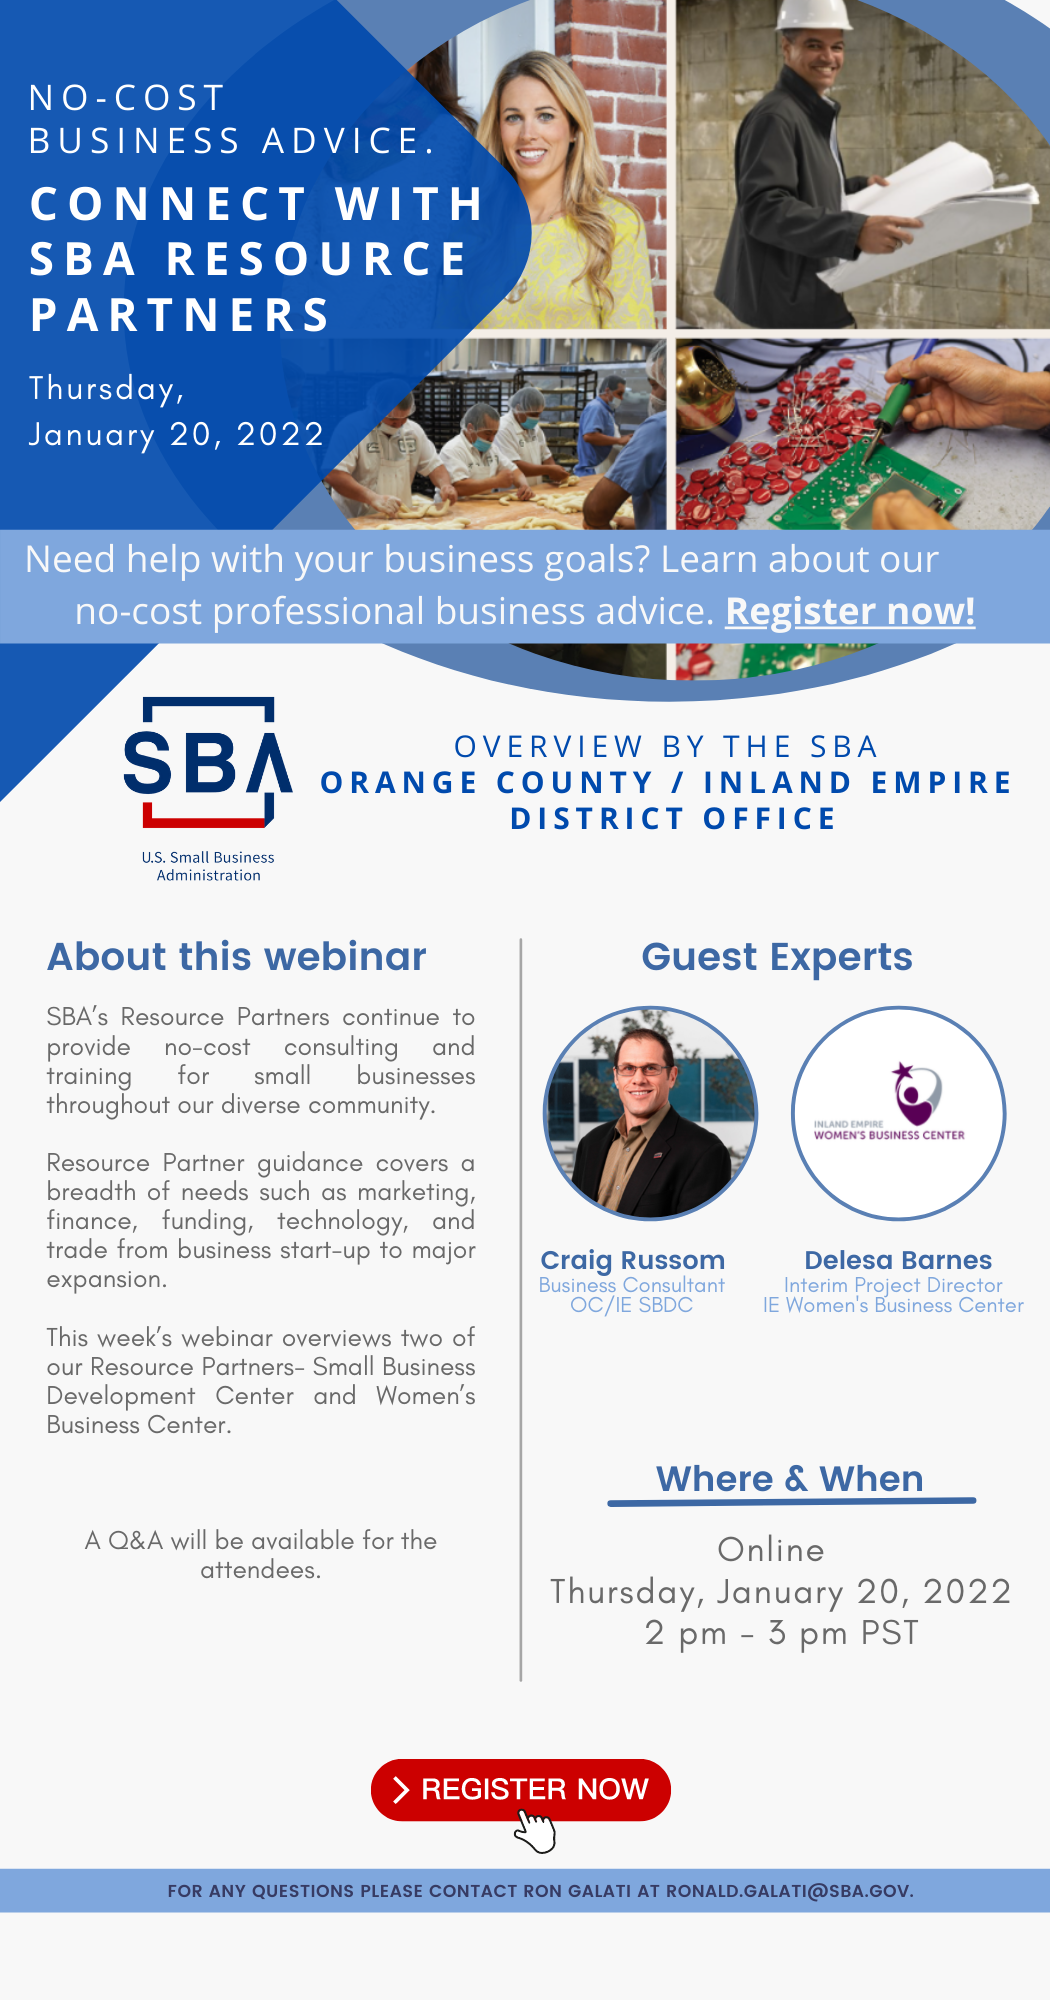 No-cost business advice. Connect with SBA Resource Partners. Register now! Thursday, January 20, 2022 2 pm - 3 pm PST  S